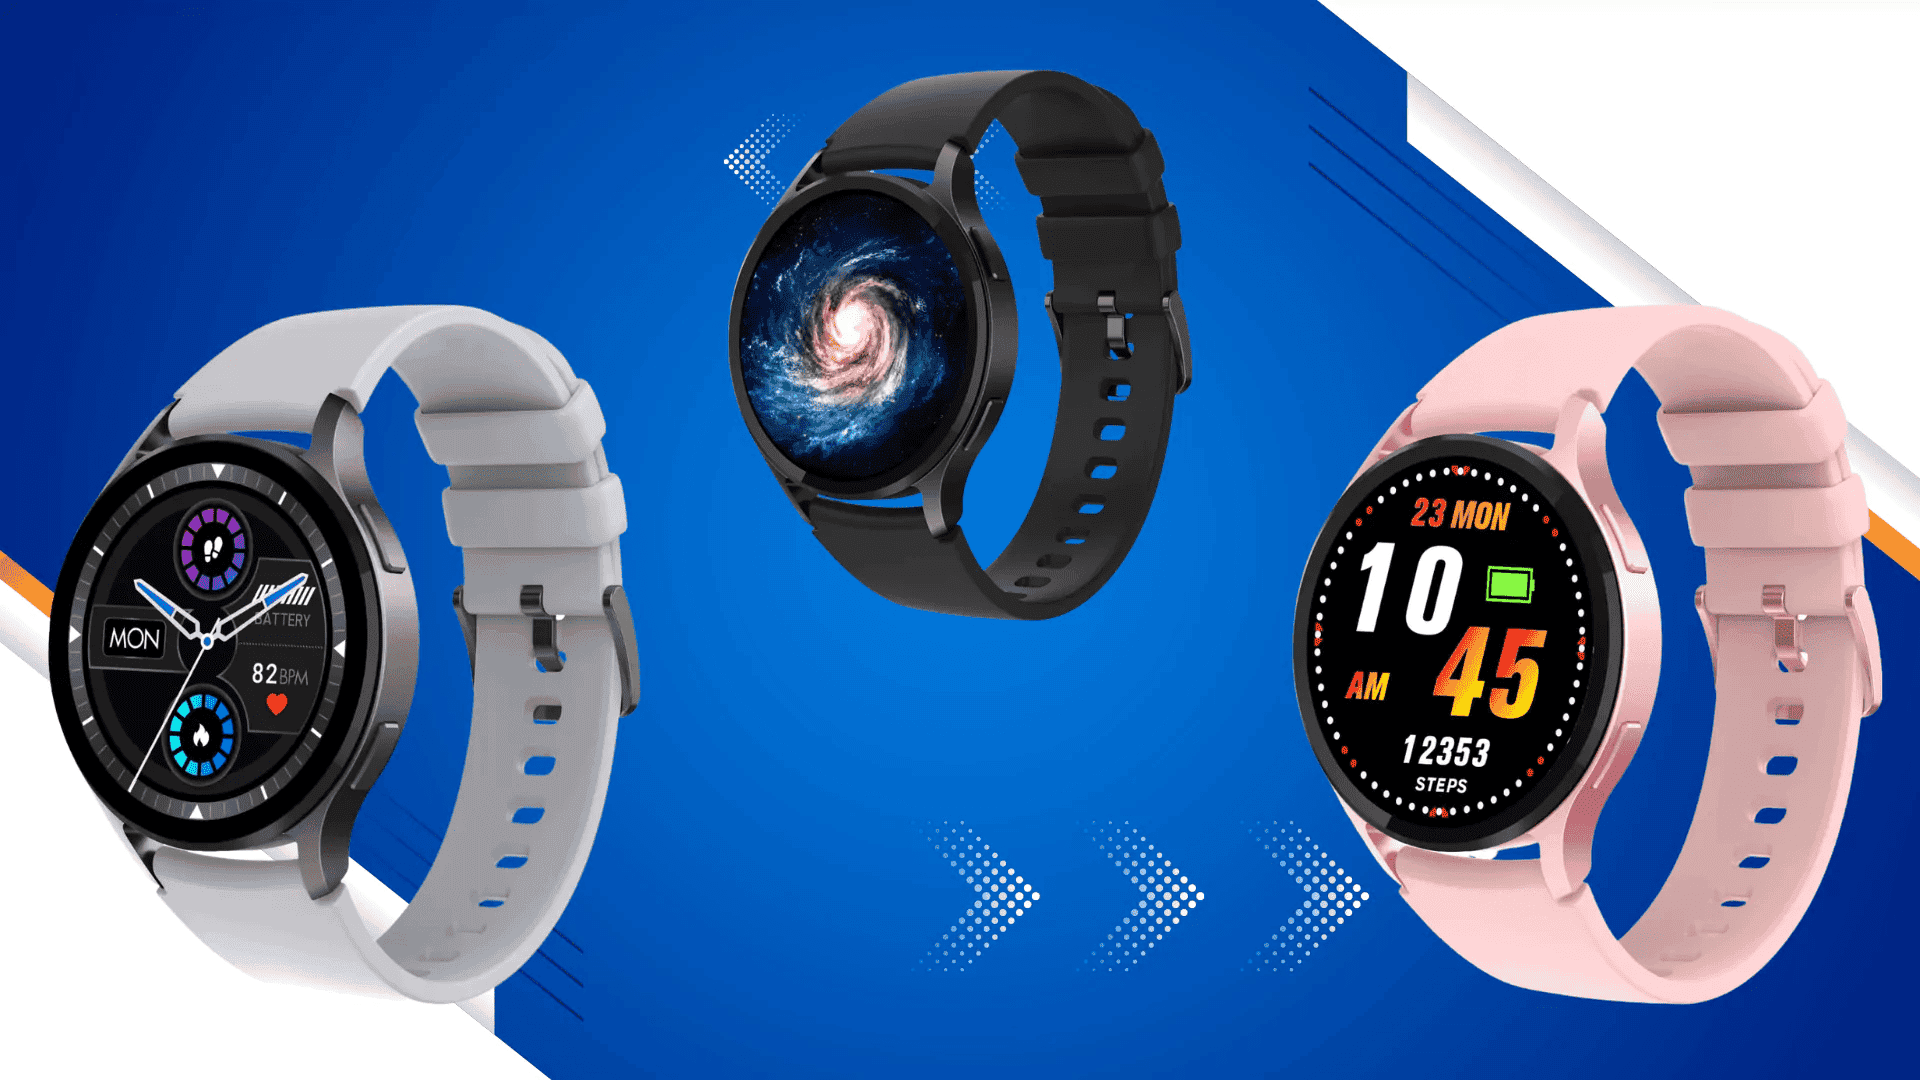 Fire-Boltt Apollo smartwatch launched with appealing price